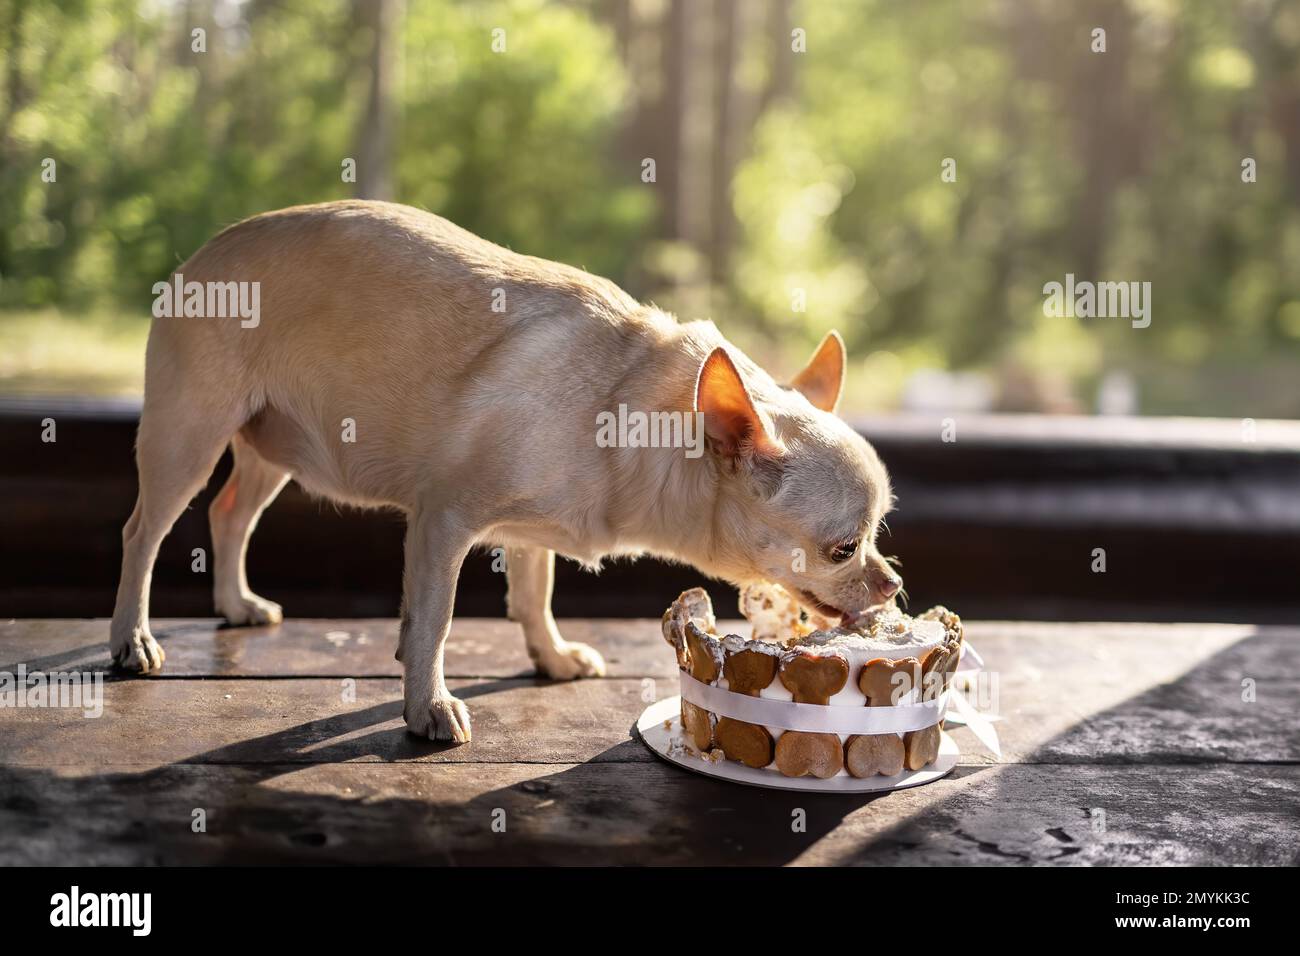 Funny old dog of chihuahua breed standing on wooden table and eating birthday cake at summer nature Stock Photo